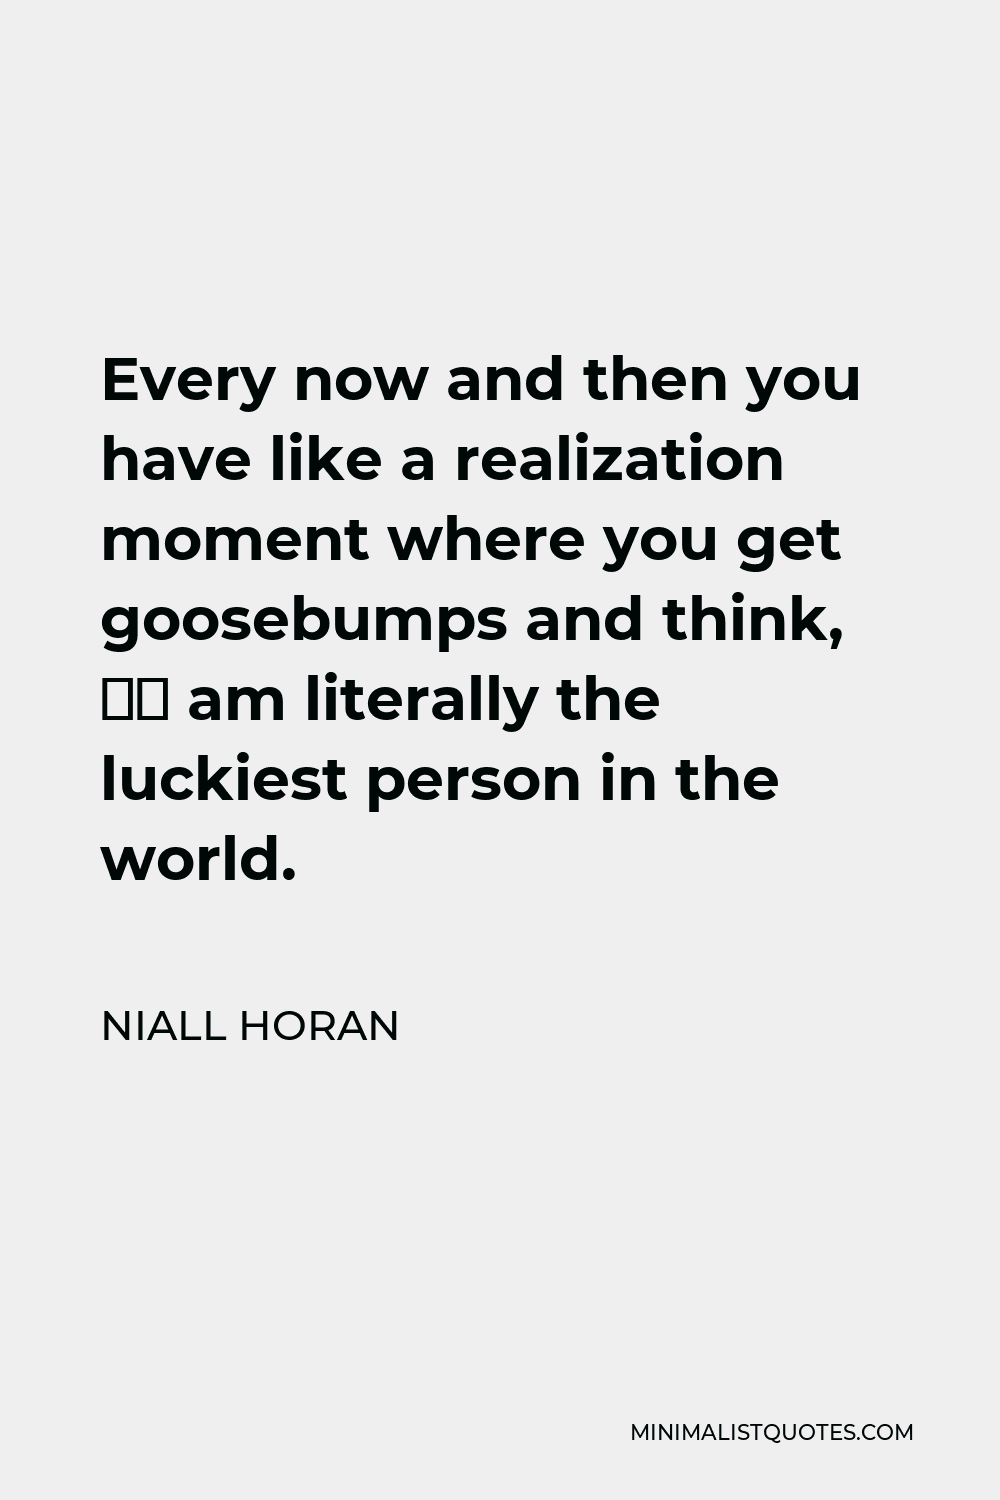 Niall Horan Quote - Every now and then you have like a realization moment where you get goosebumps and think, “I am literally the luckiest person in the world.